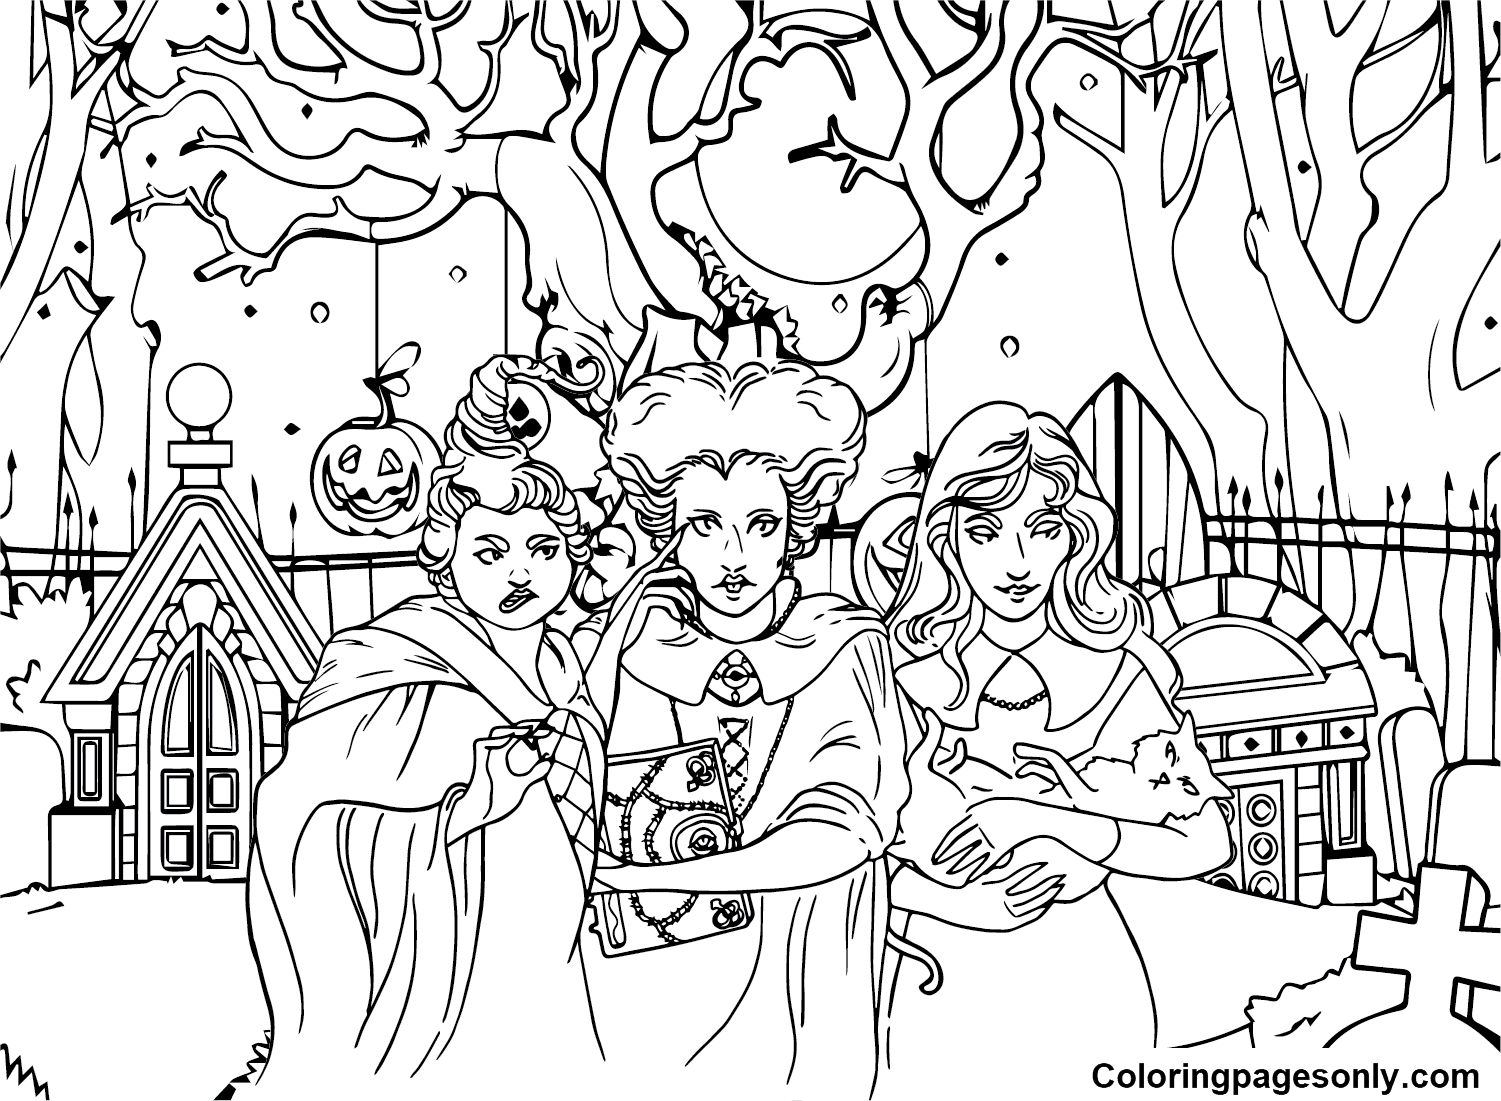 Free Hocus Pocus Images Coloring Page